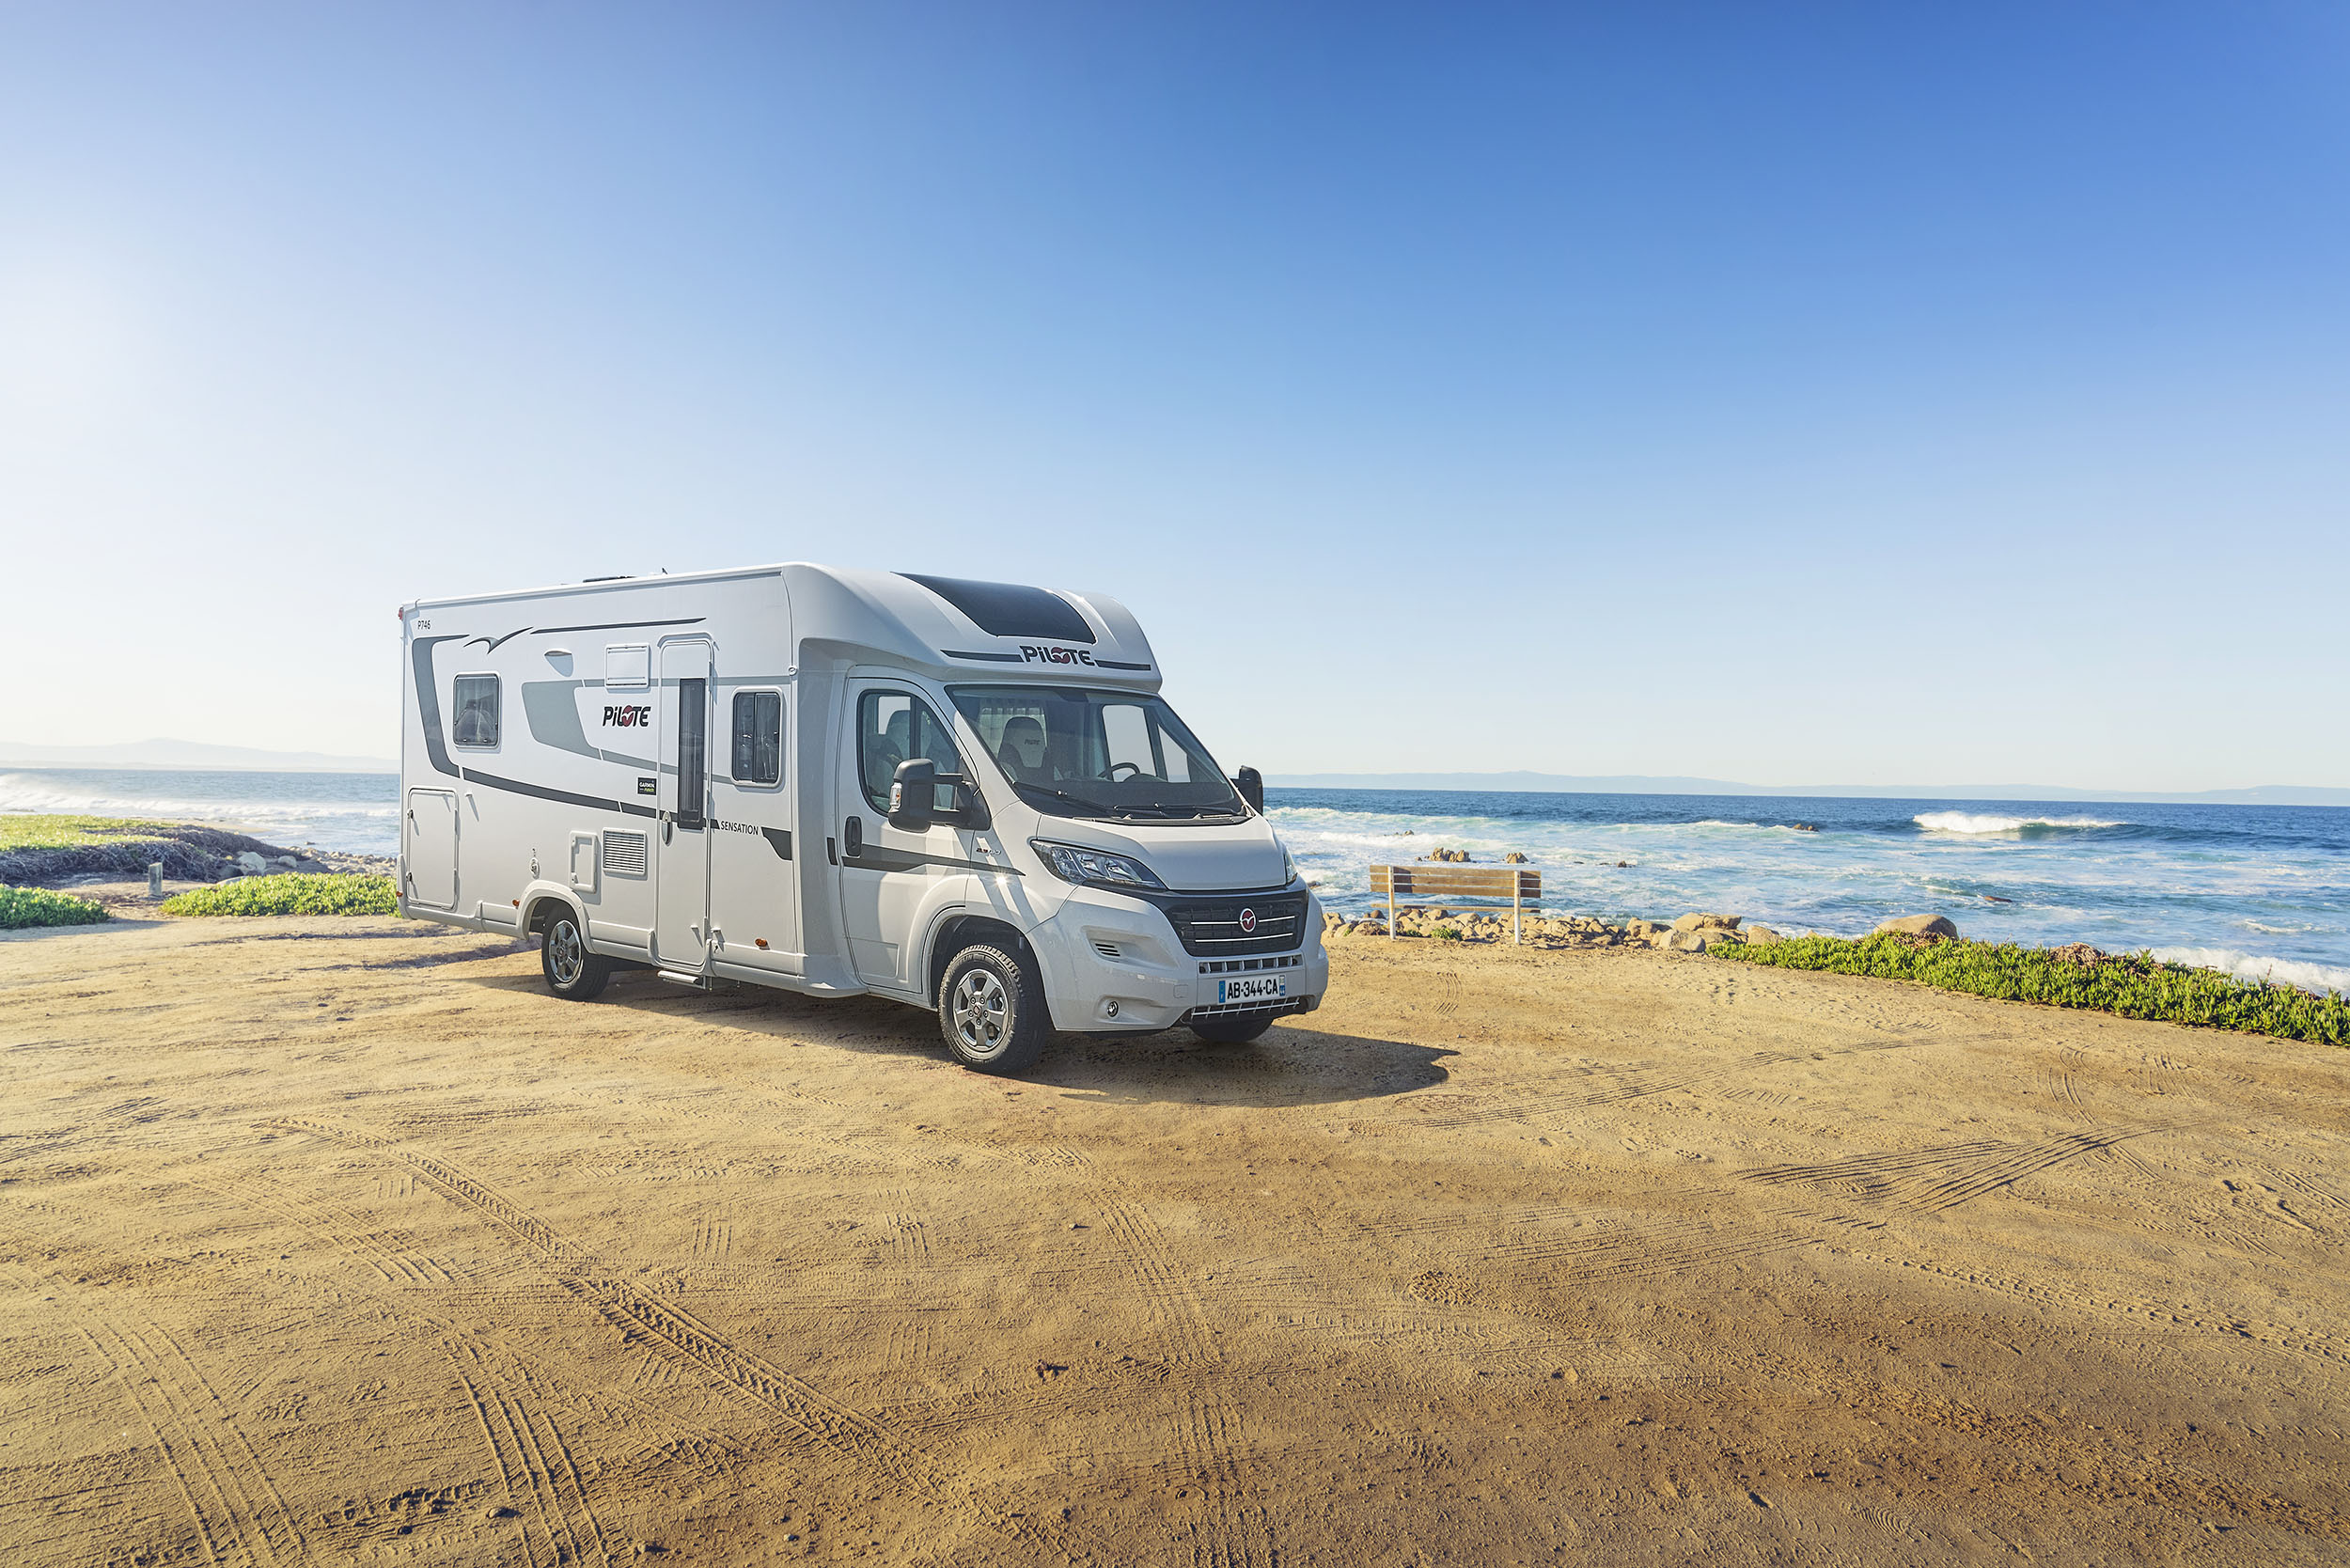 Motorhome rental for the first time. Check what to do! – main image